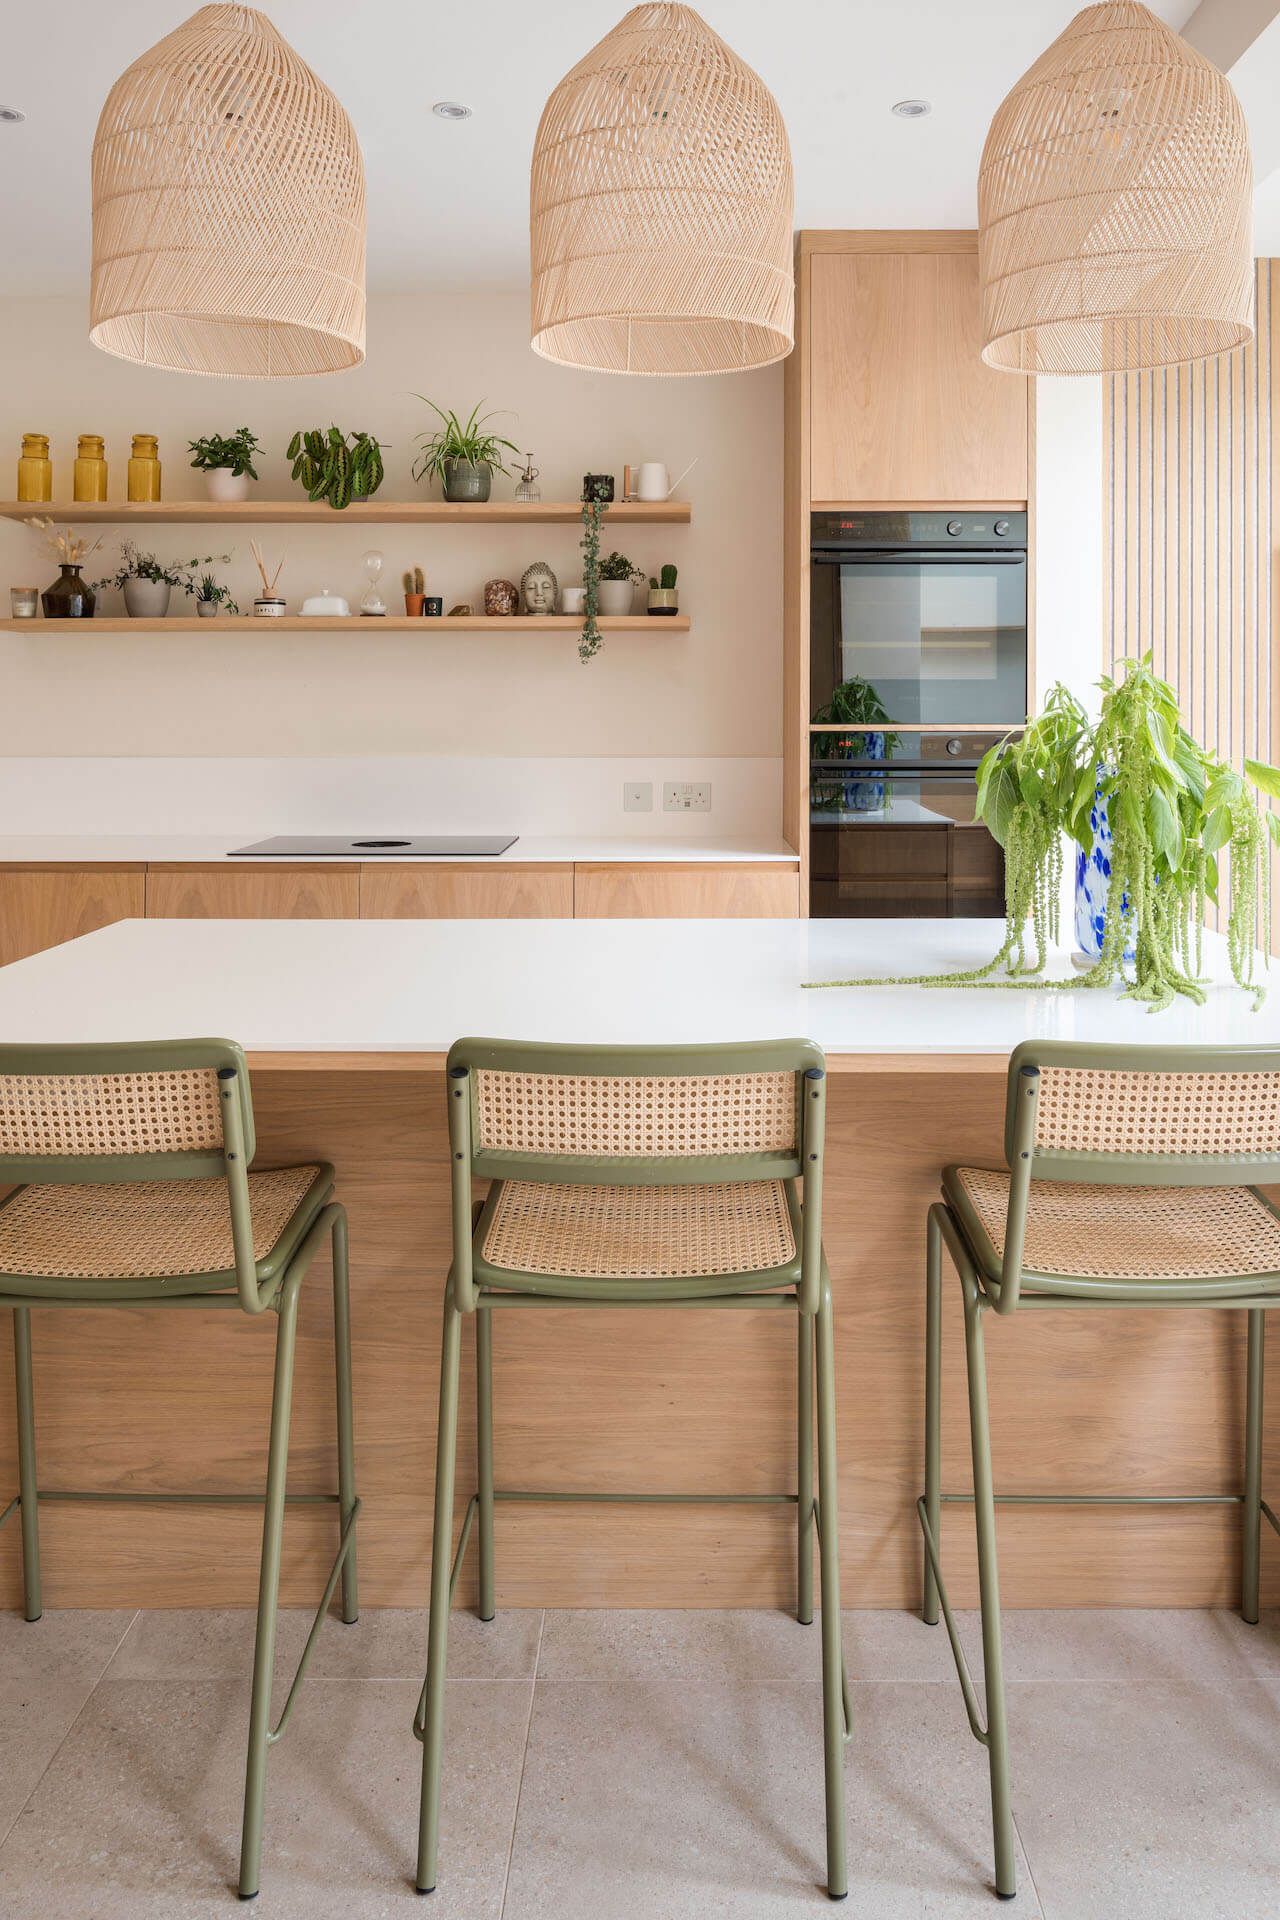 The Complete Guide to Choosing the
Perfect Kitchen Island Stools